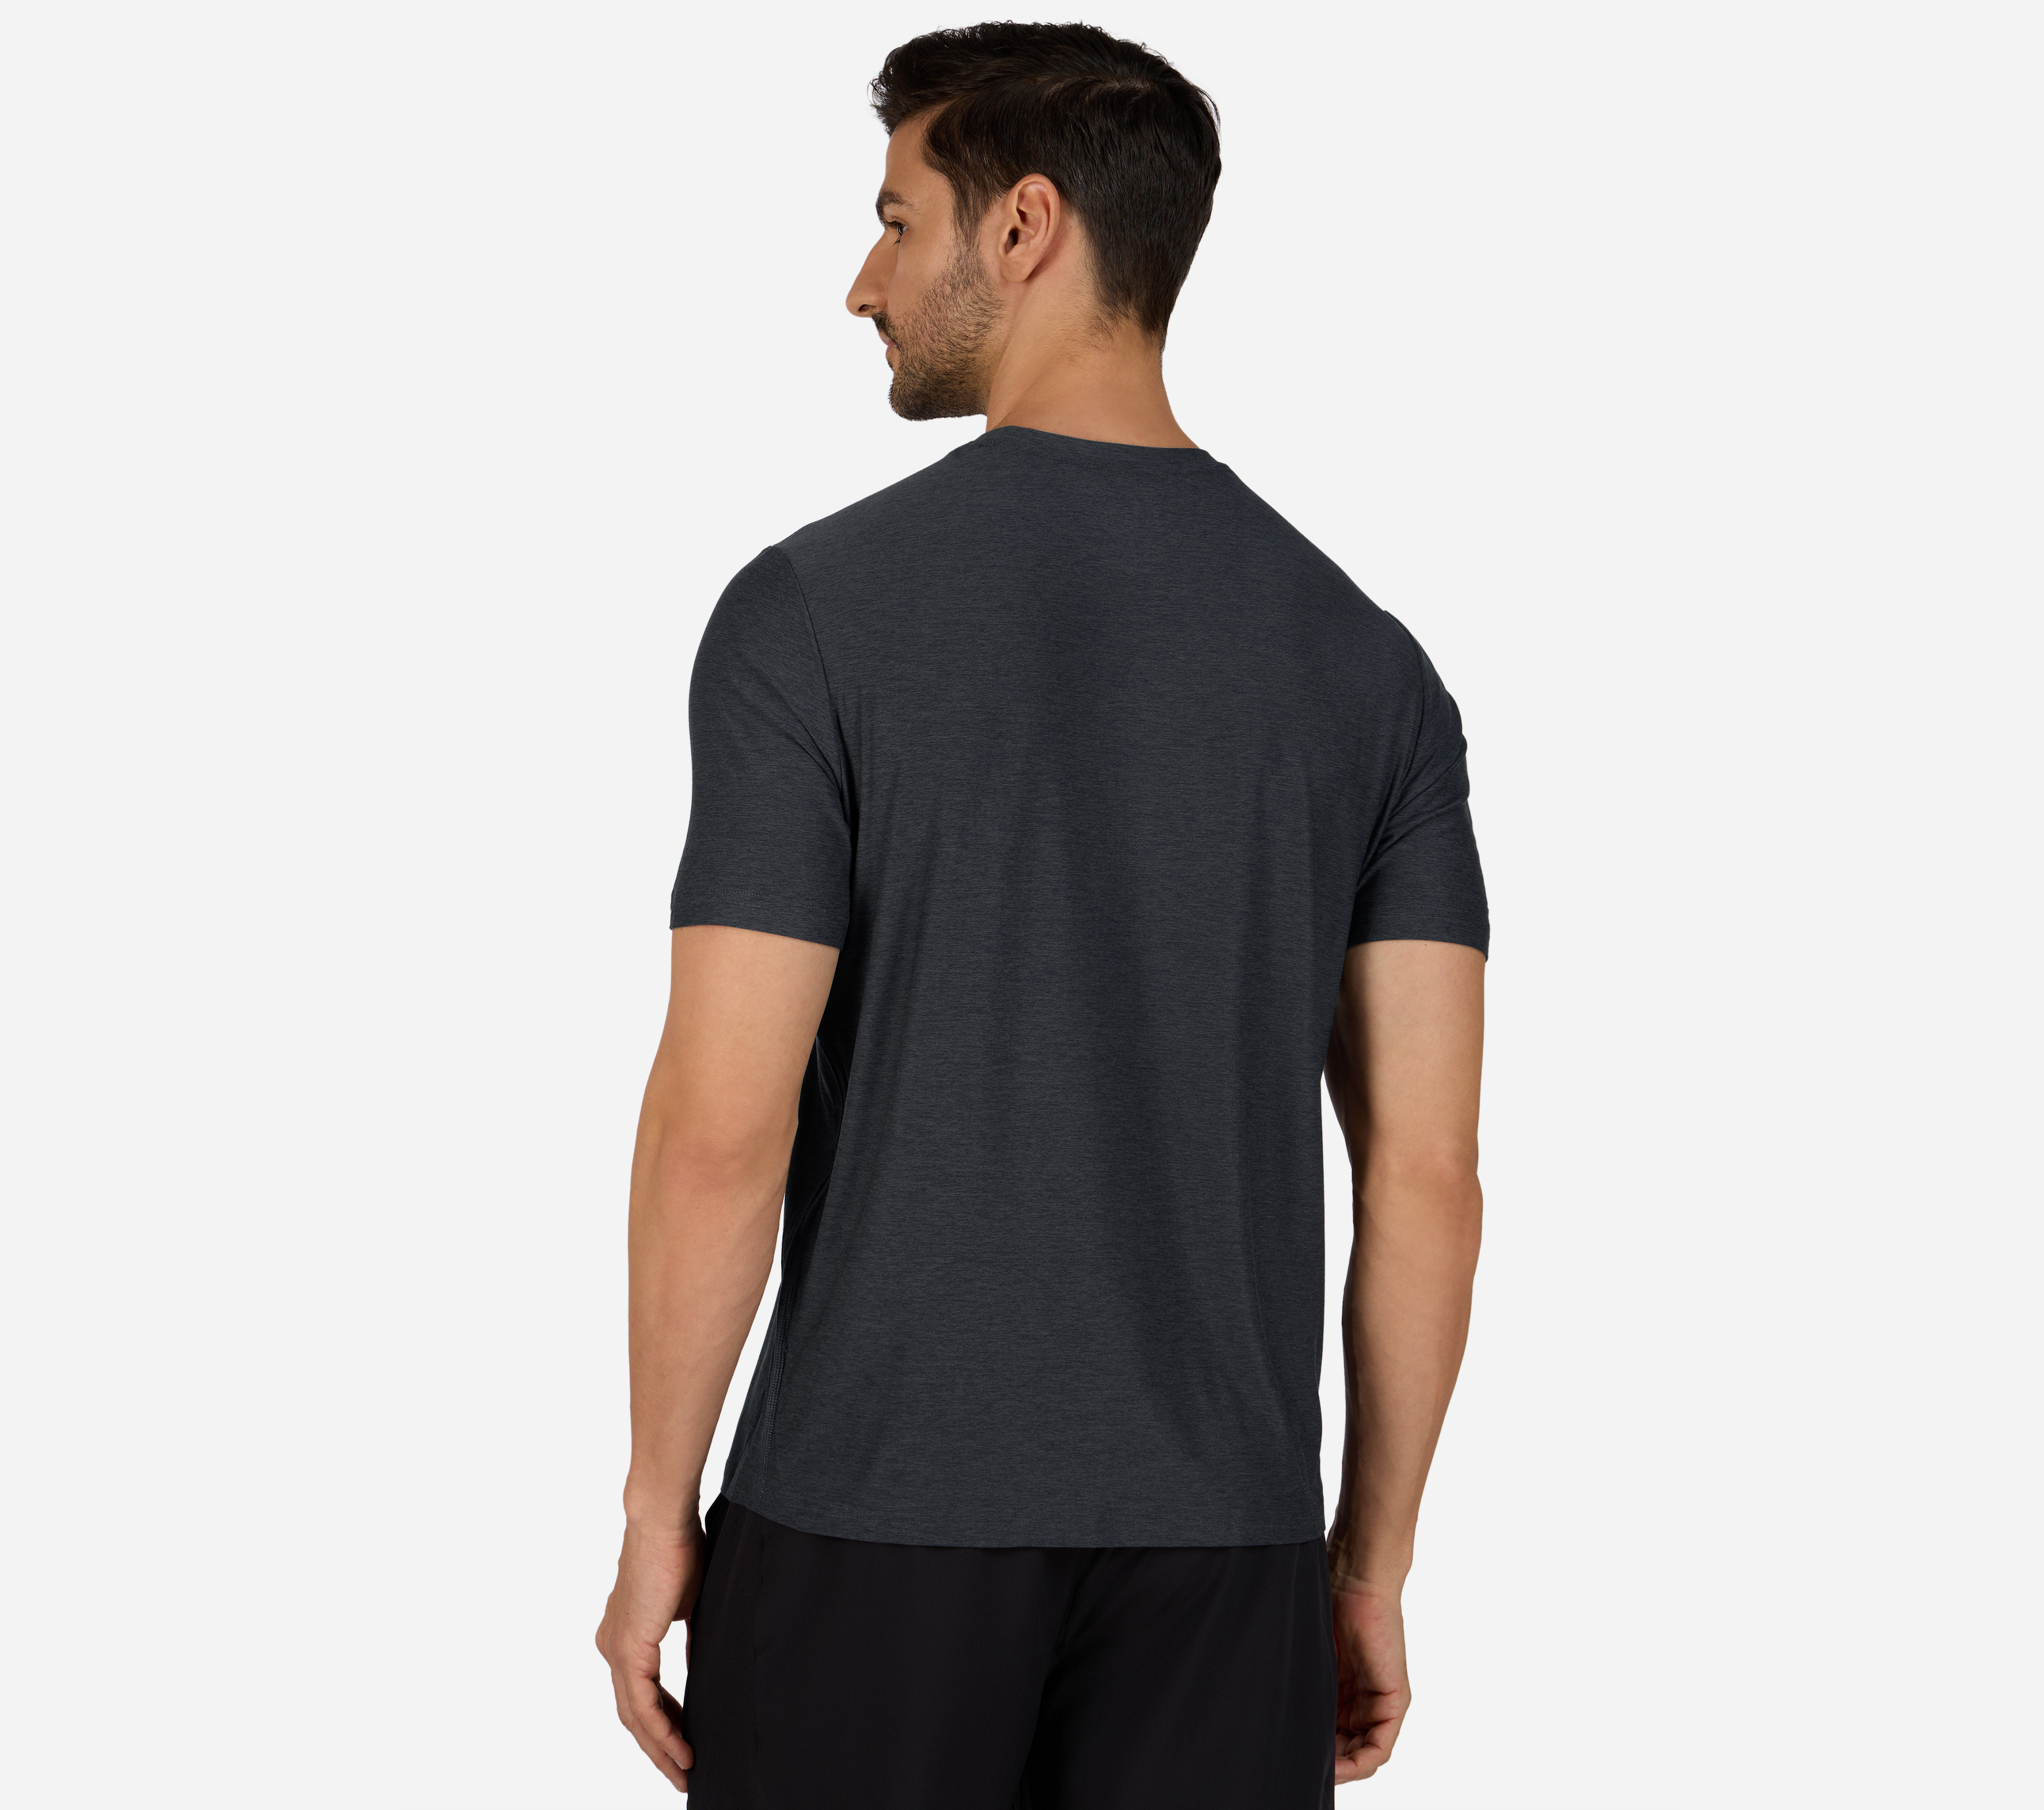 GODRI ALL DAY OUTPACE T-SHIRT, CHARCOAL/NAVY Apparels Bottom View